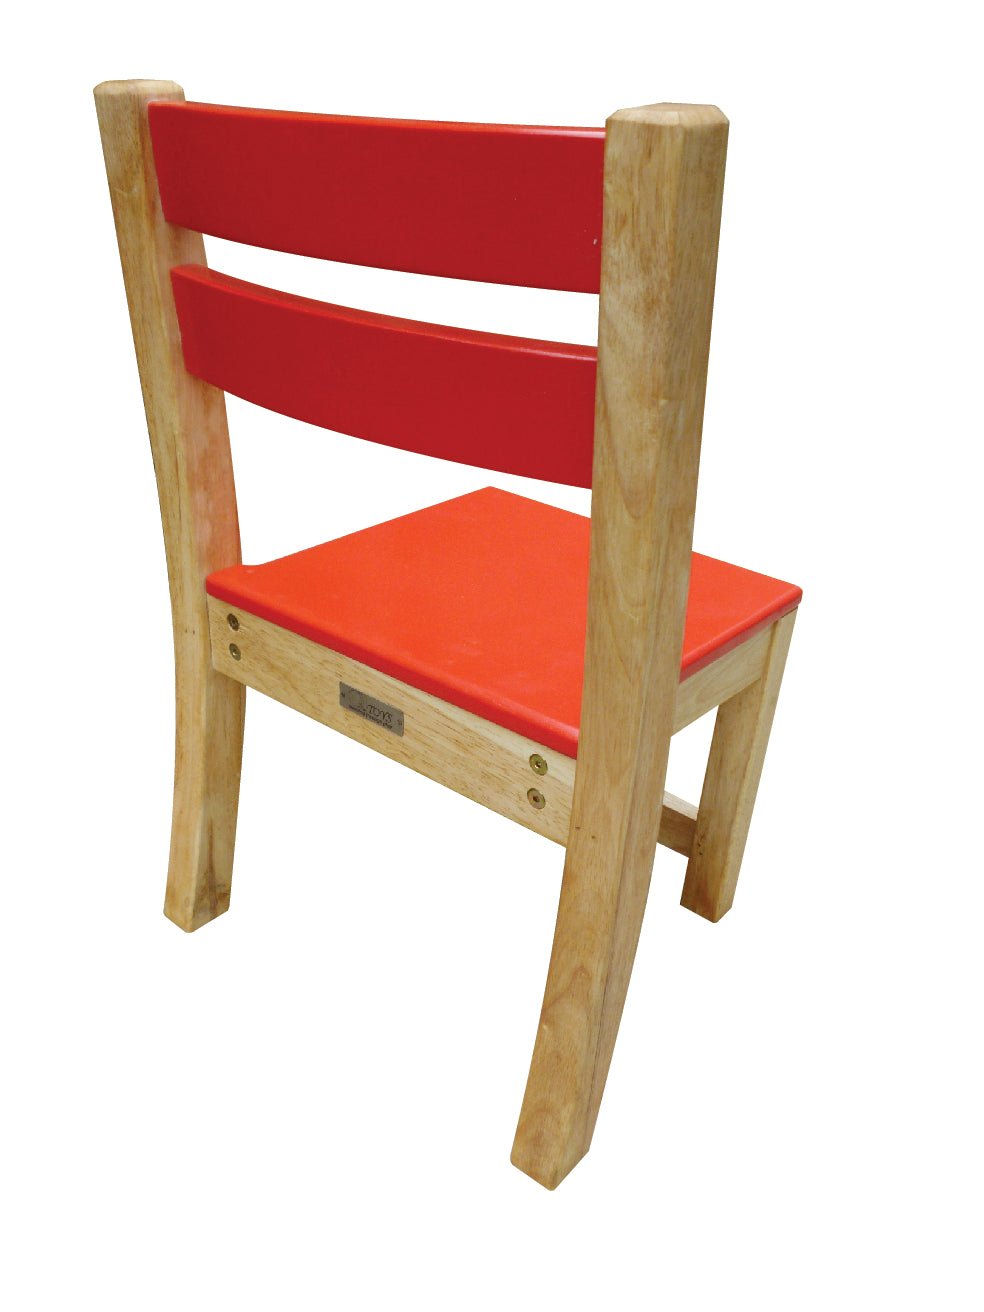 Red Top Timber Table with 2 Matching Chairs